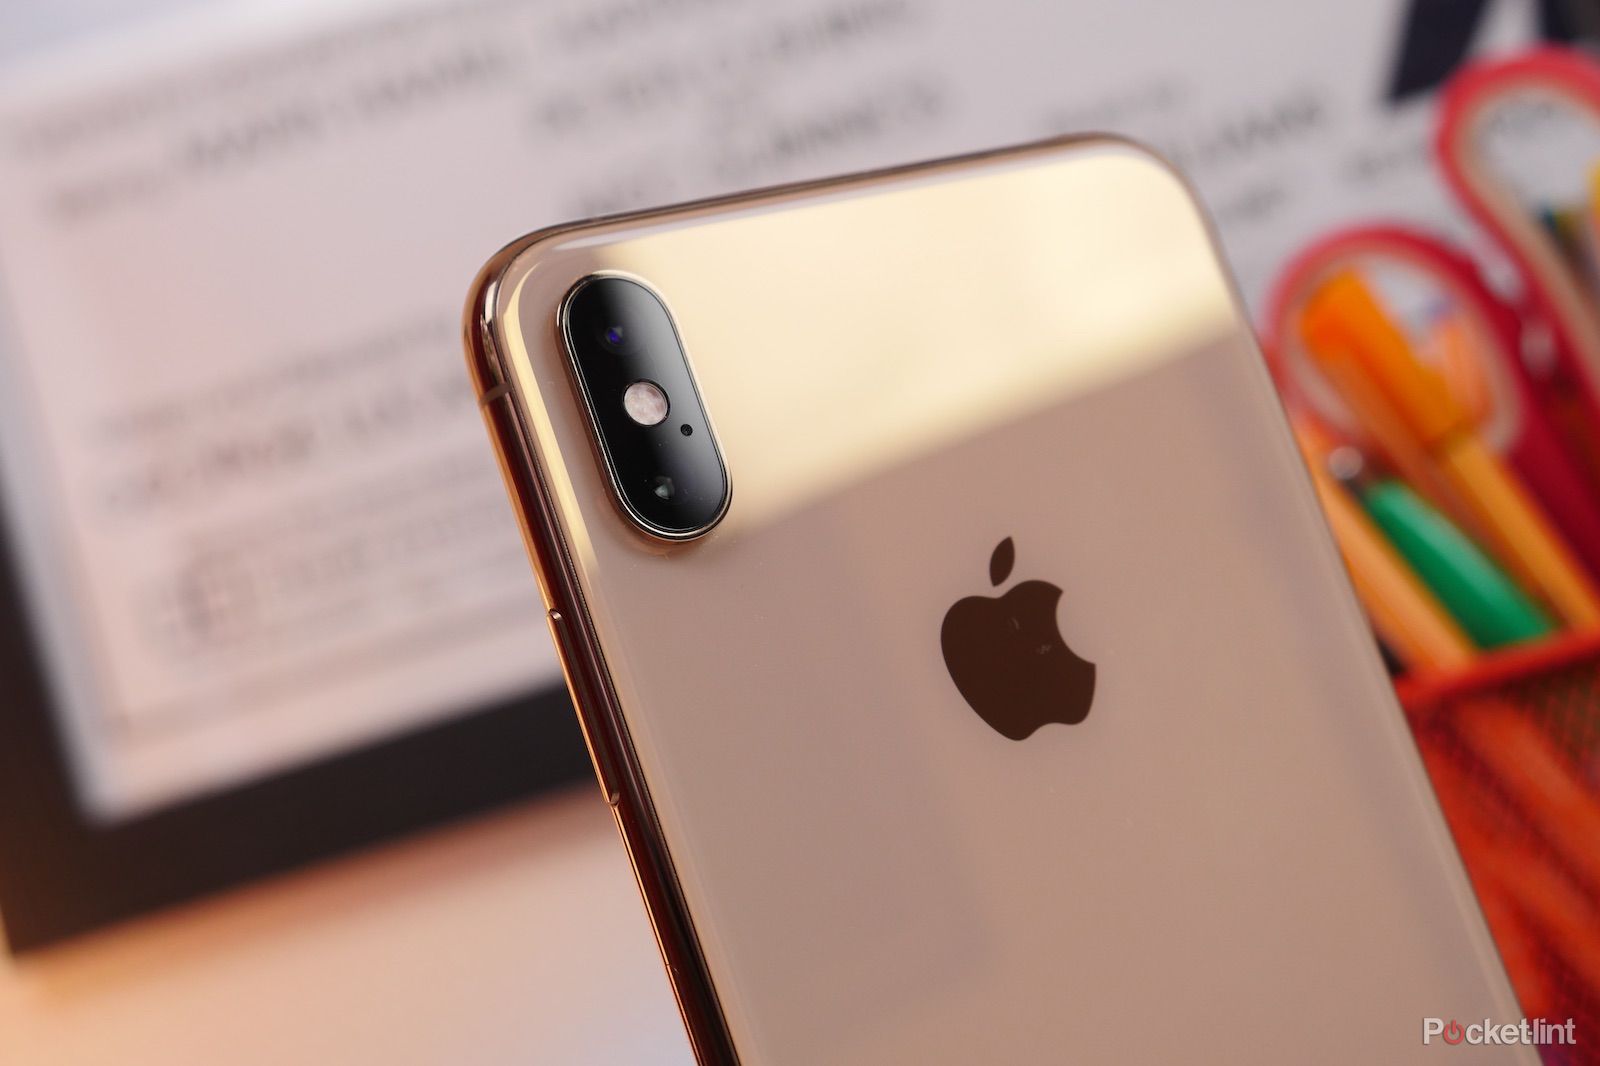 iPhone 11 will improve the iPhones ability to take great night time photos image 1